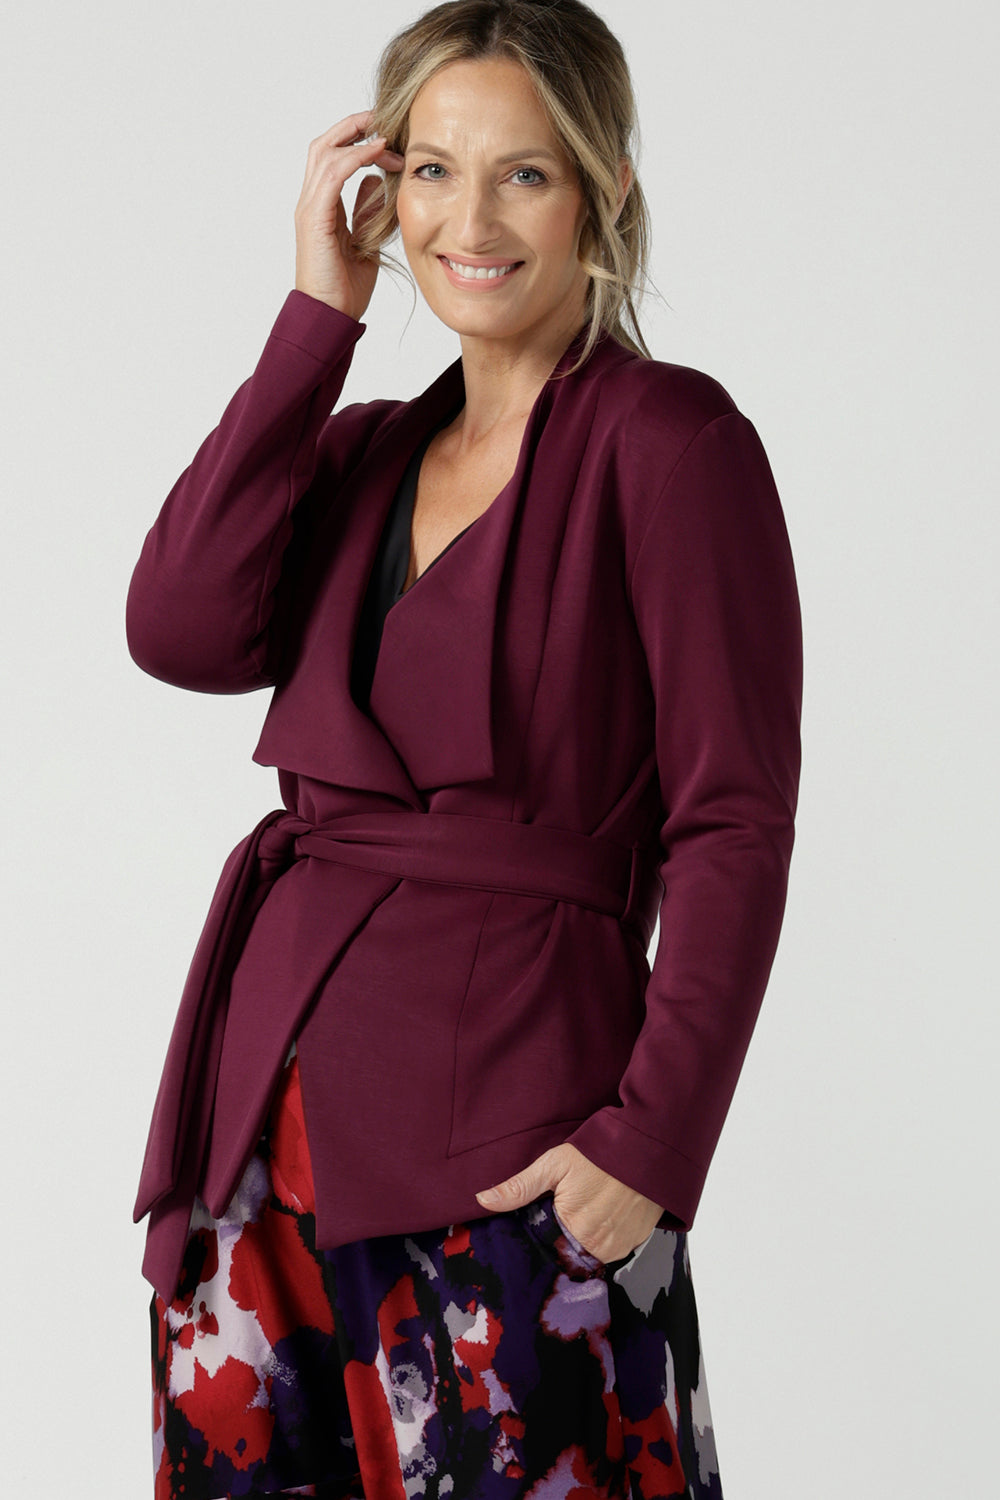 Size 10 woman wears the Lyndon Jacket in Wine a made in Australia jacket in comfortable and easy care modal fabric. Made in Australia for women size 8 - 24. 